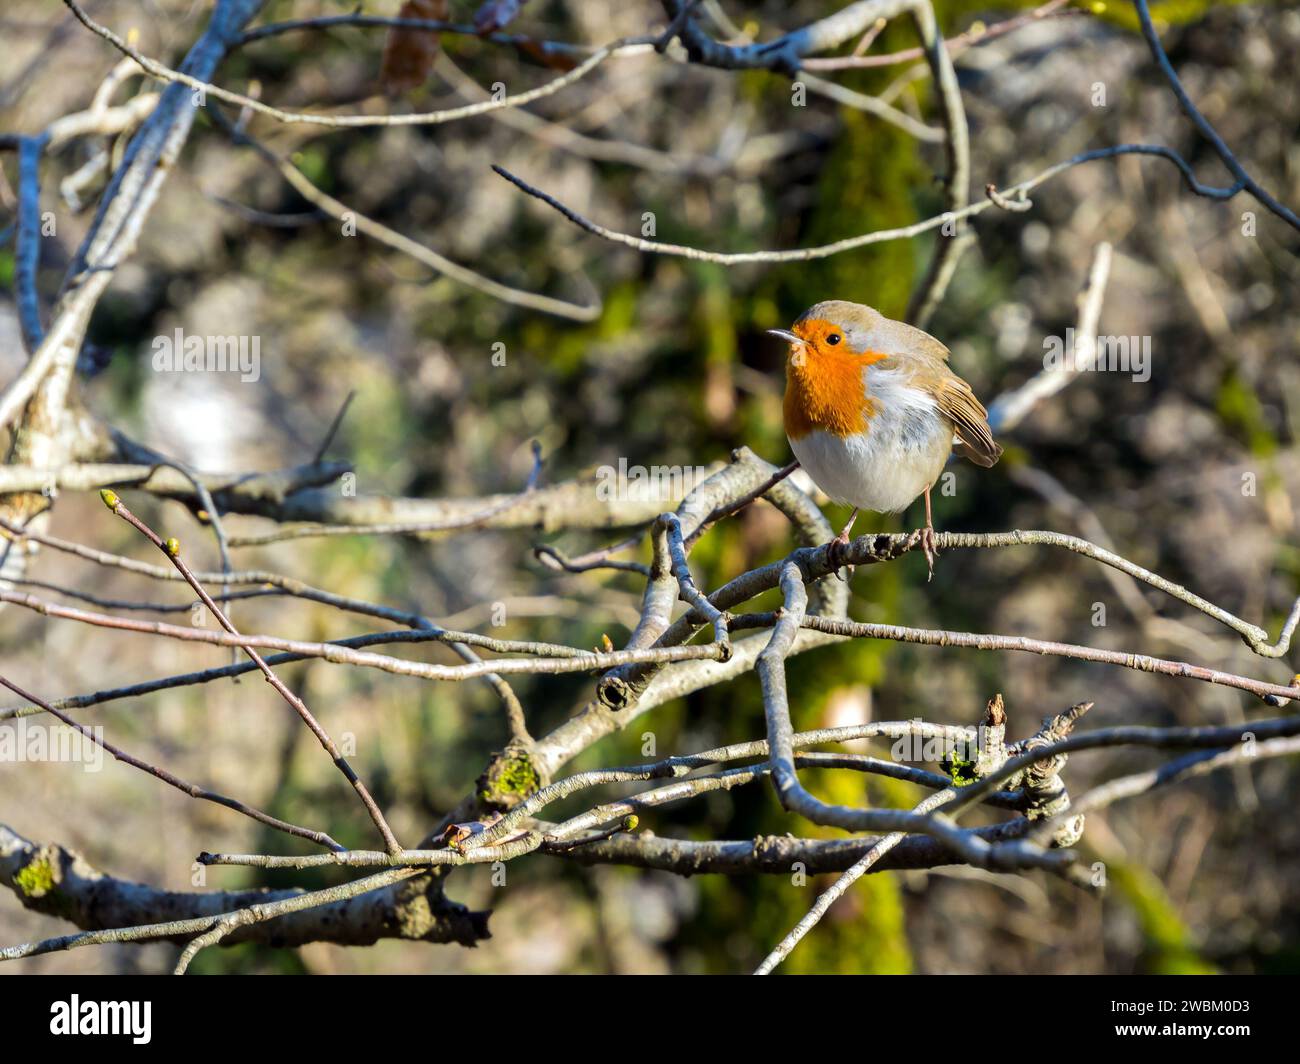 Black-headed red-breasted nuthatch (sitta krueperi) on a branch in a spring forest Stock Photo